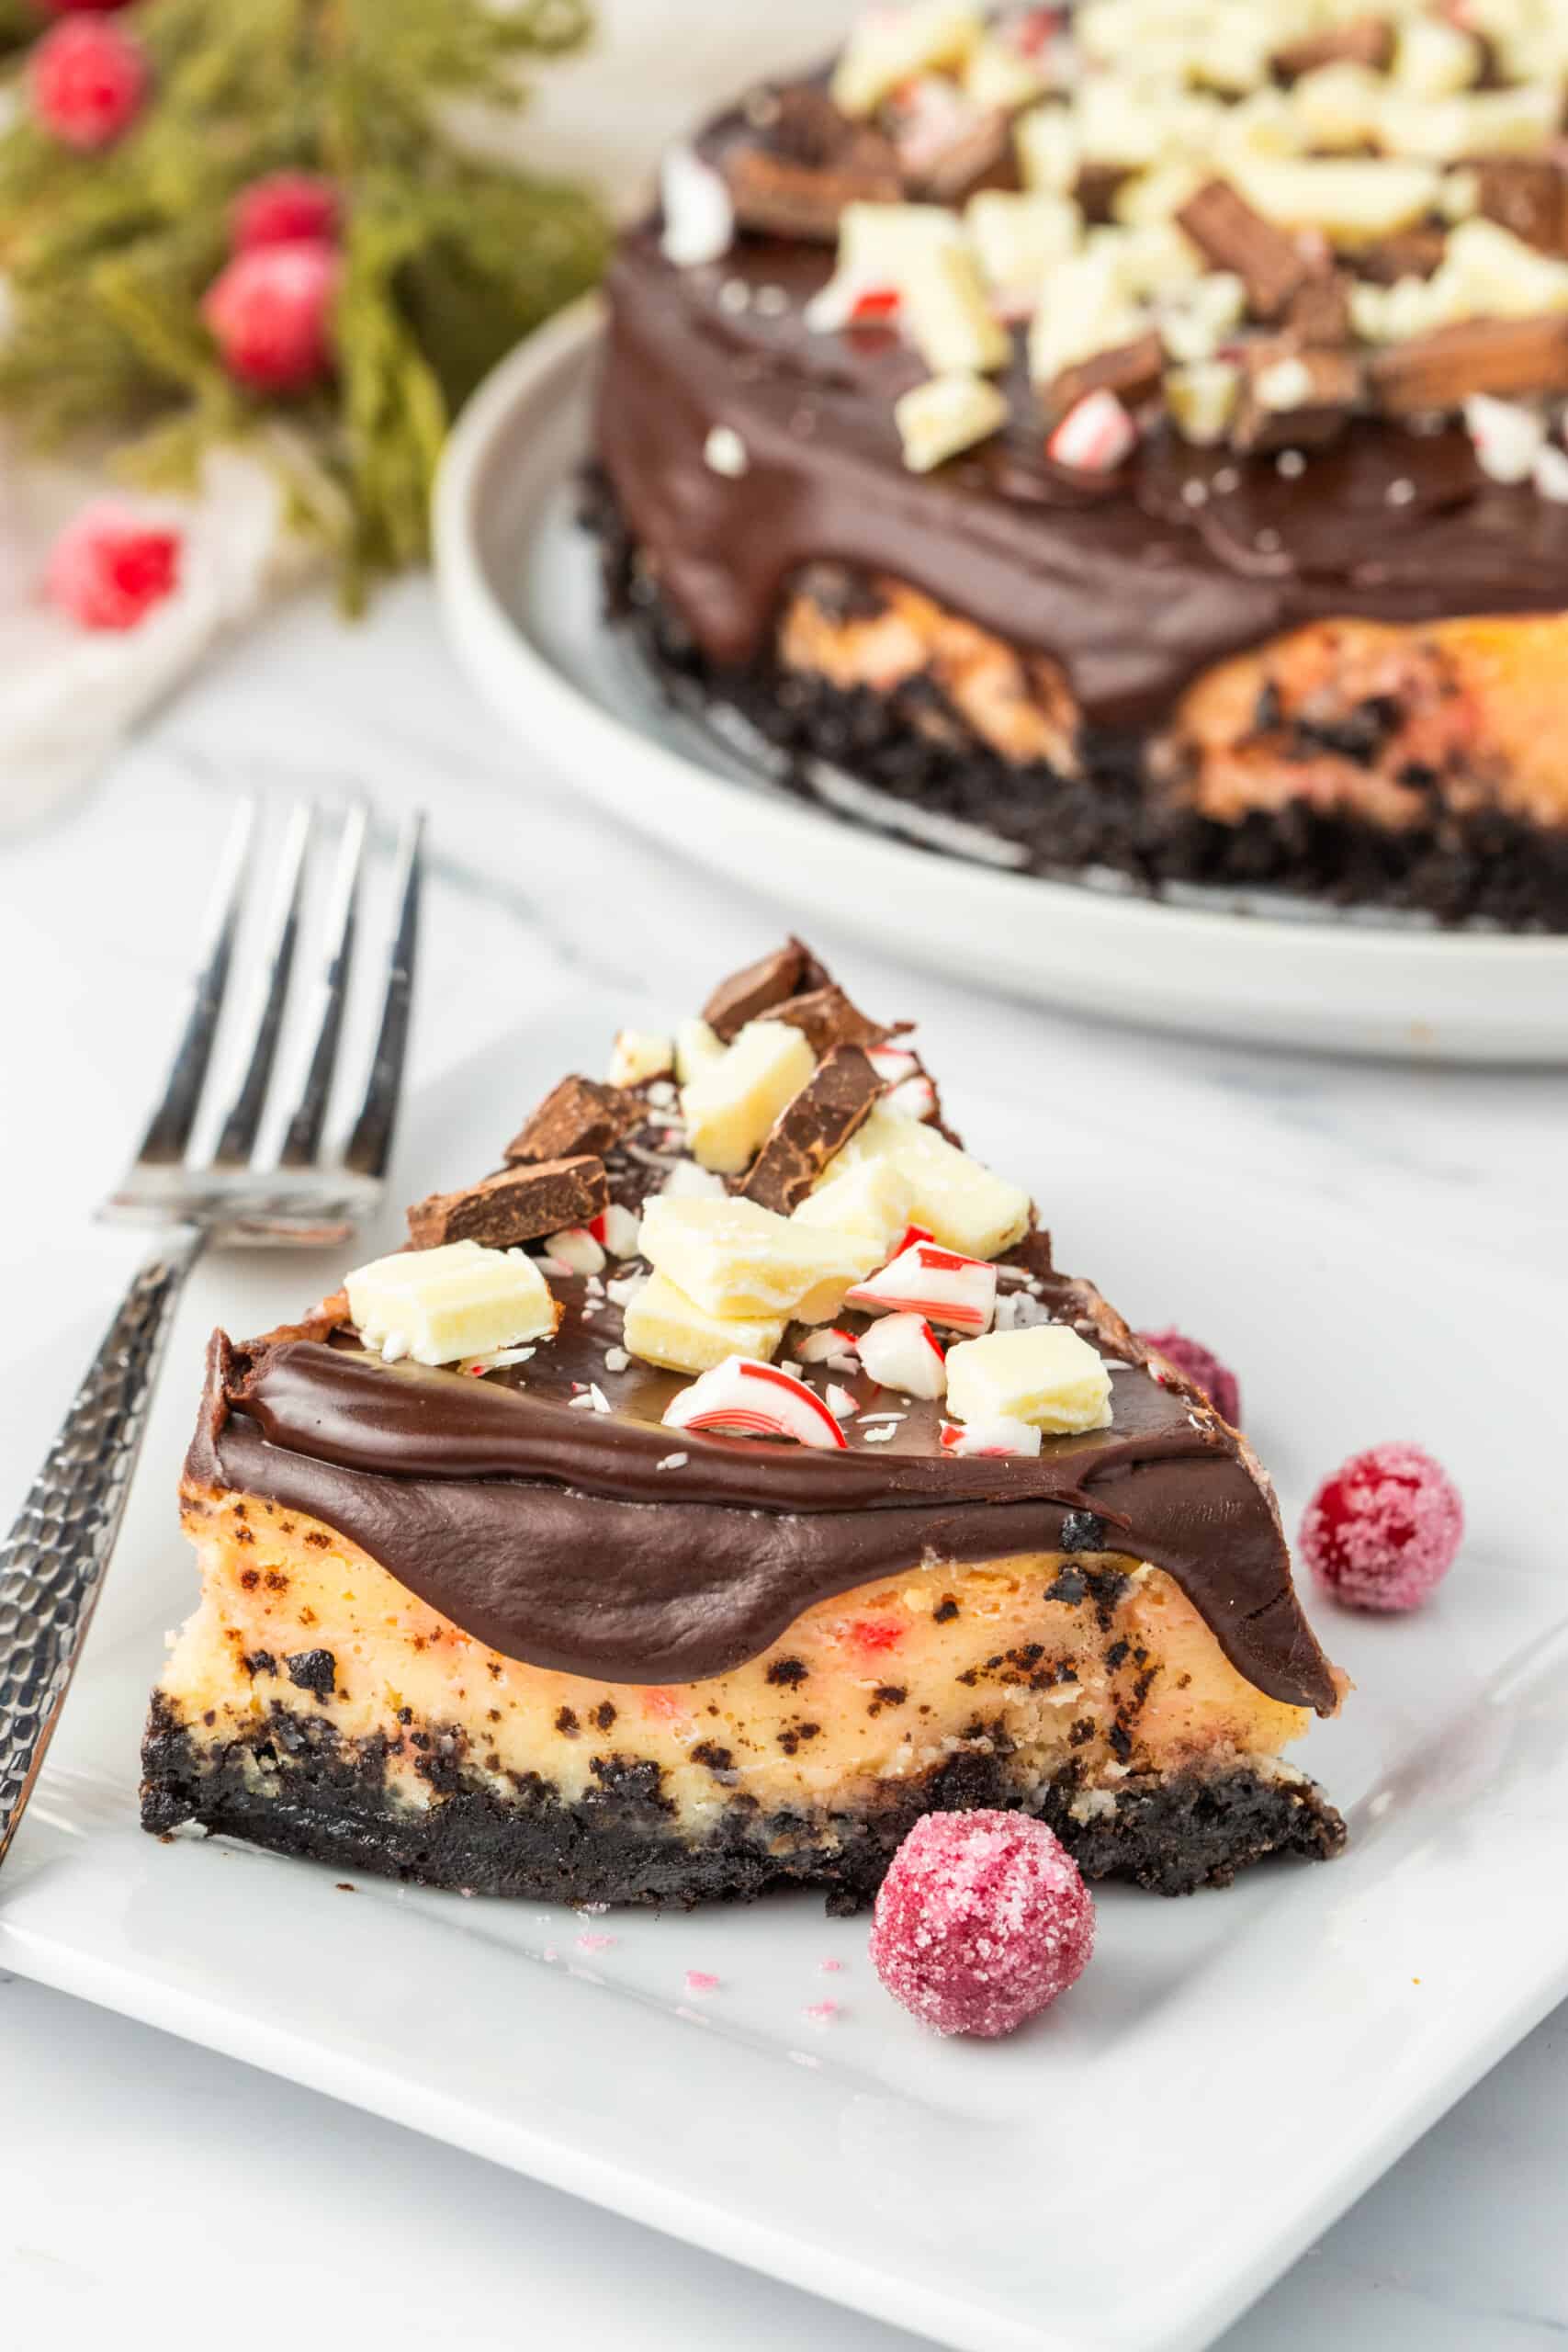 A slice of chocolate peppermint cheesecake on a plate.